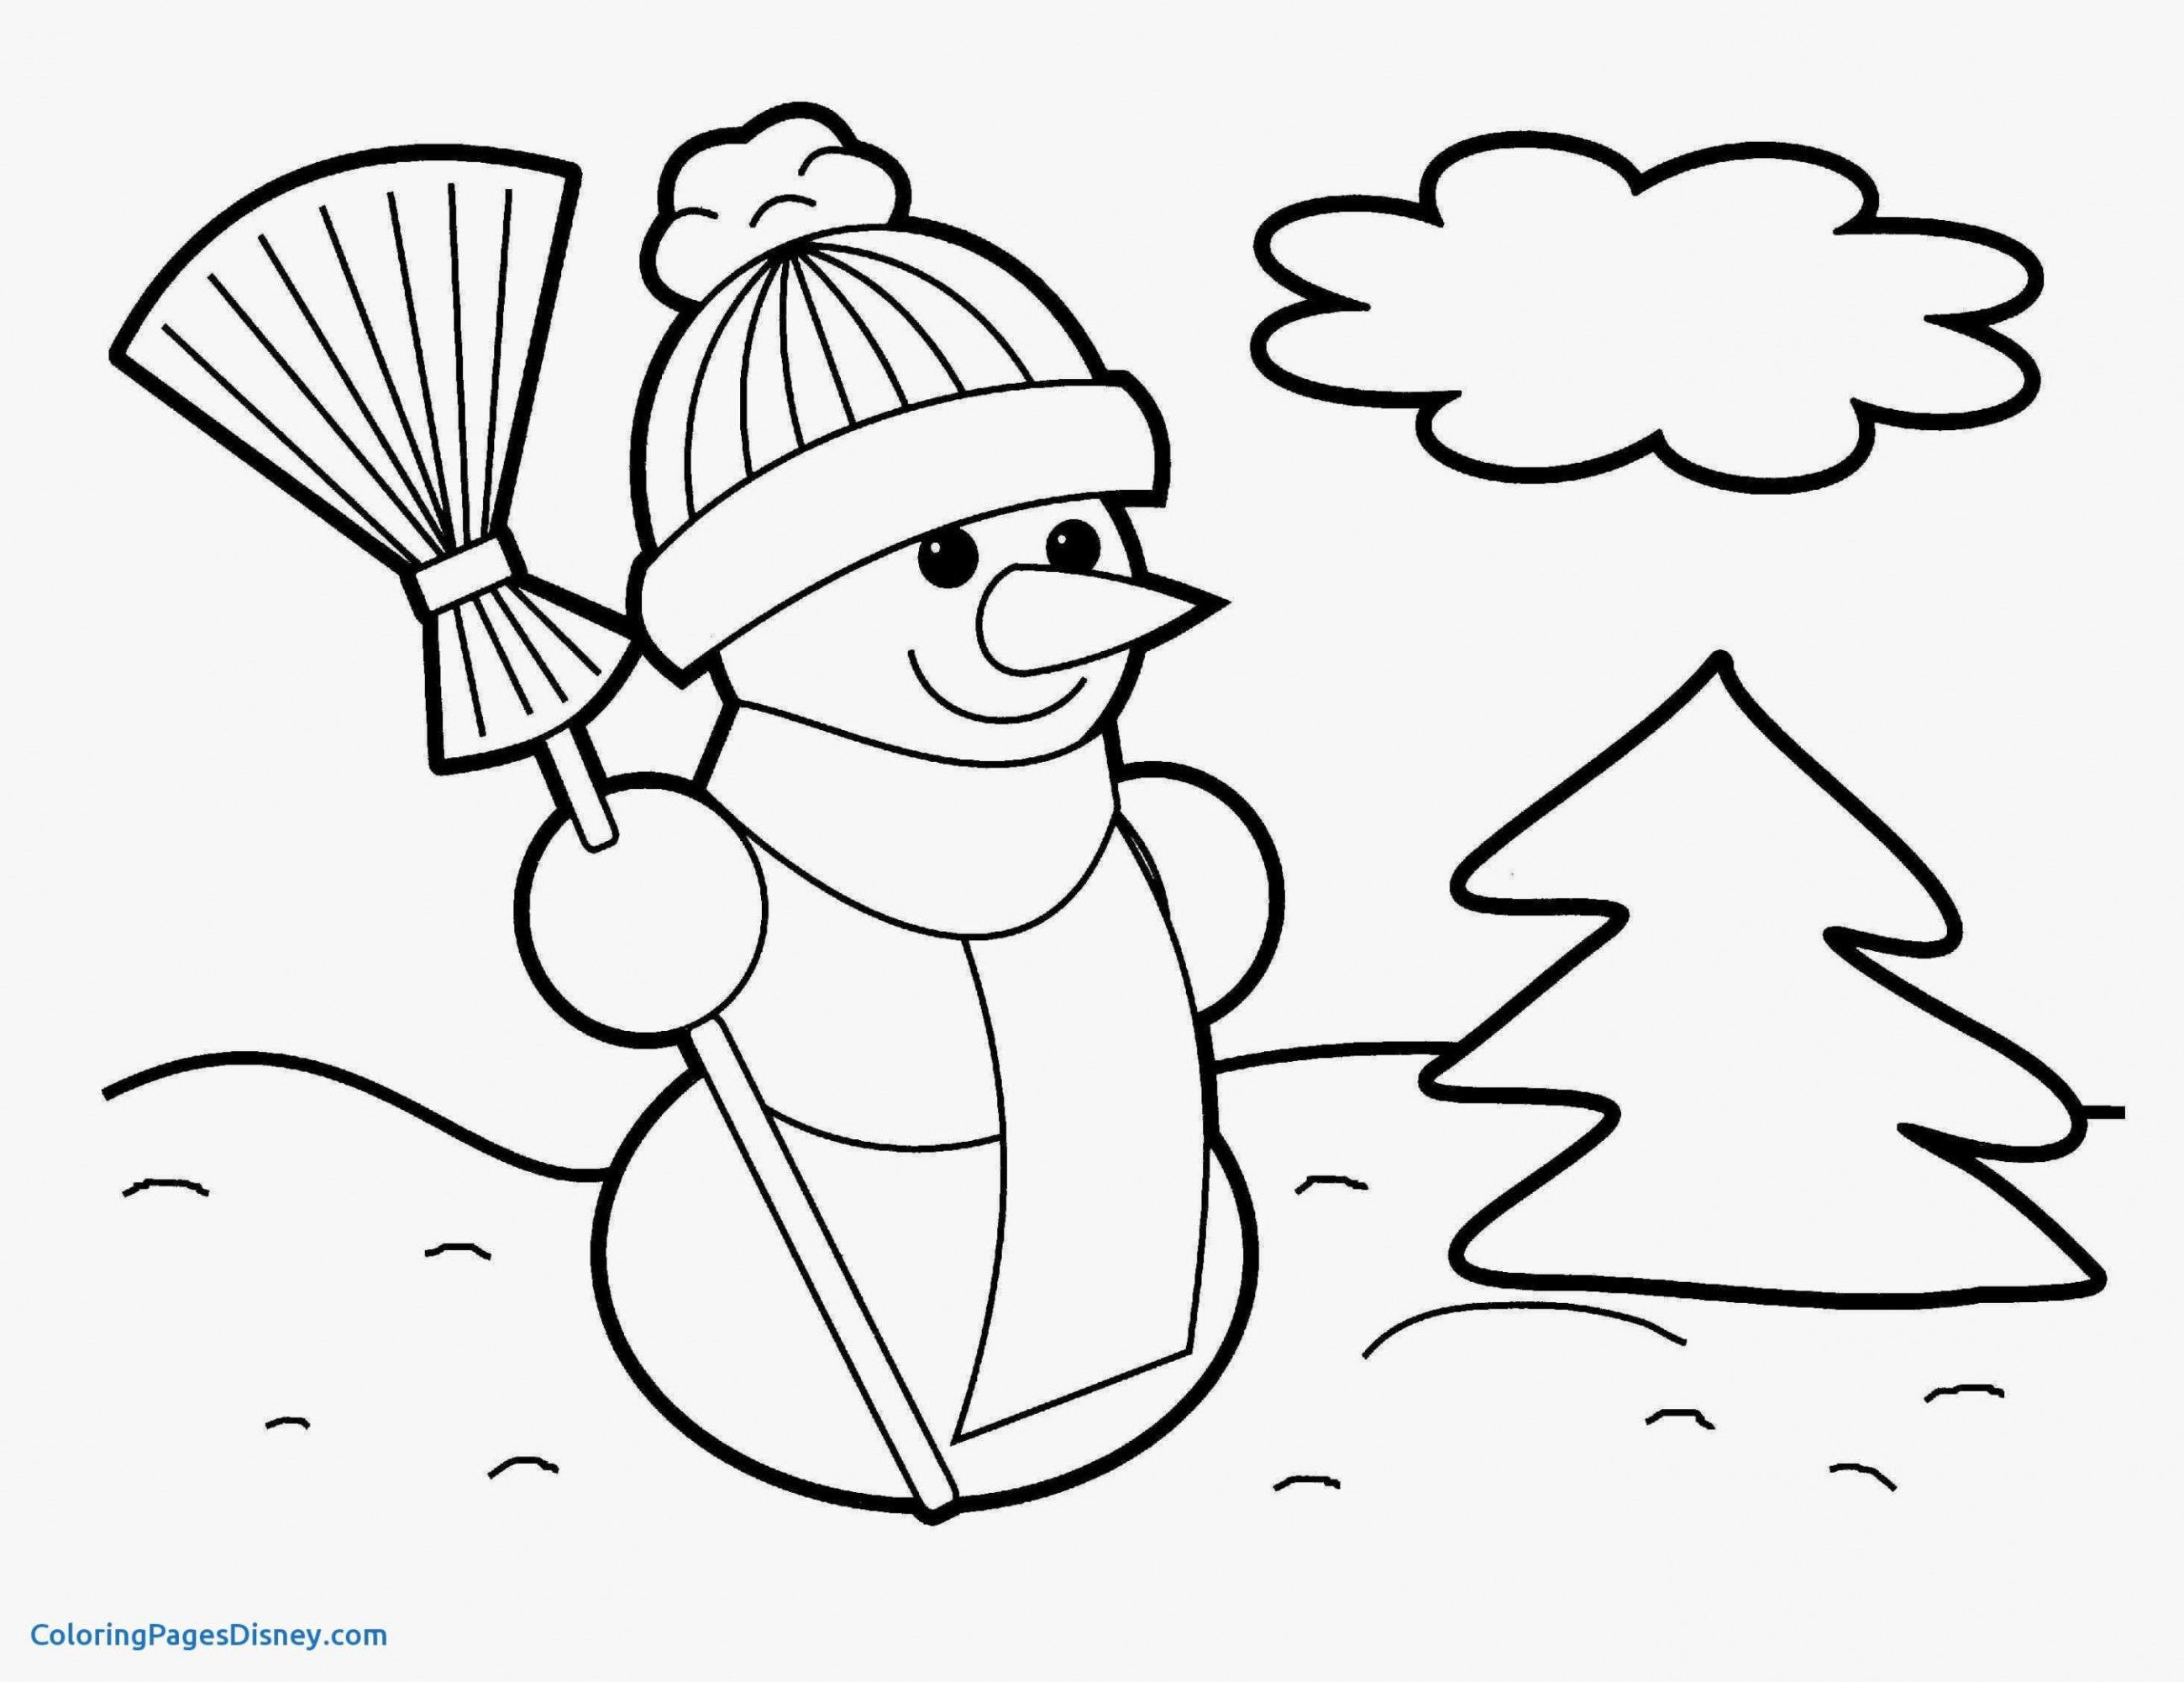 Toad And Toadette Coloring Pages Coloring Fabulous Nintendo Coloring Pages Photo Ideas For Kids To